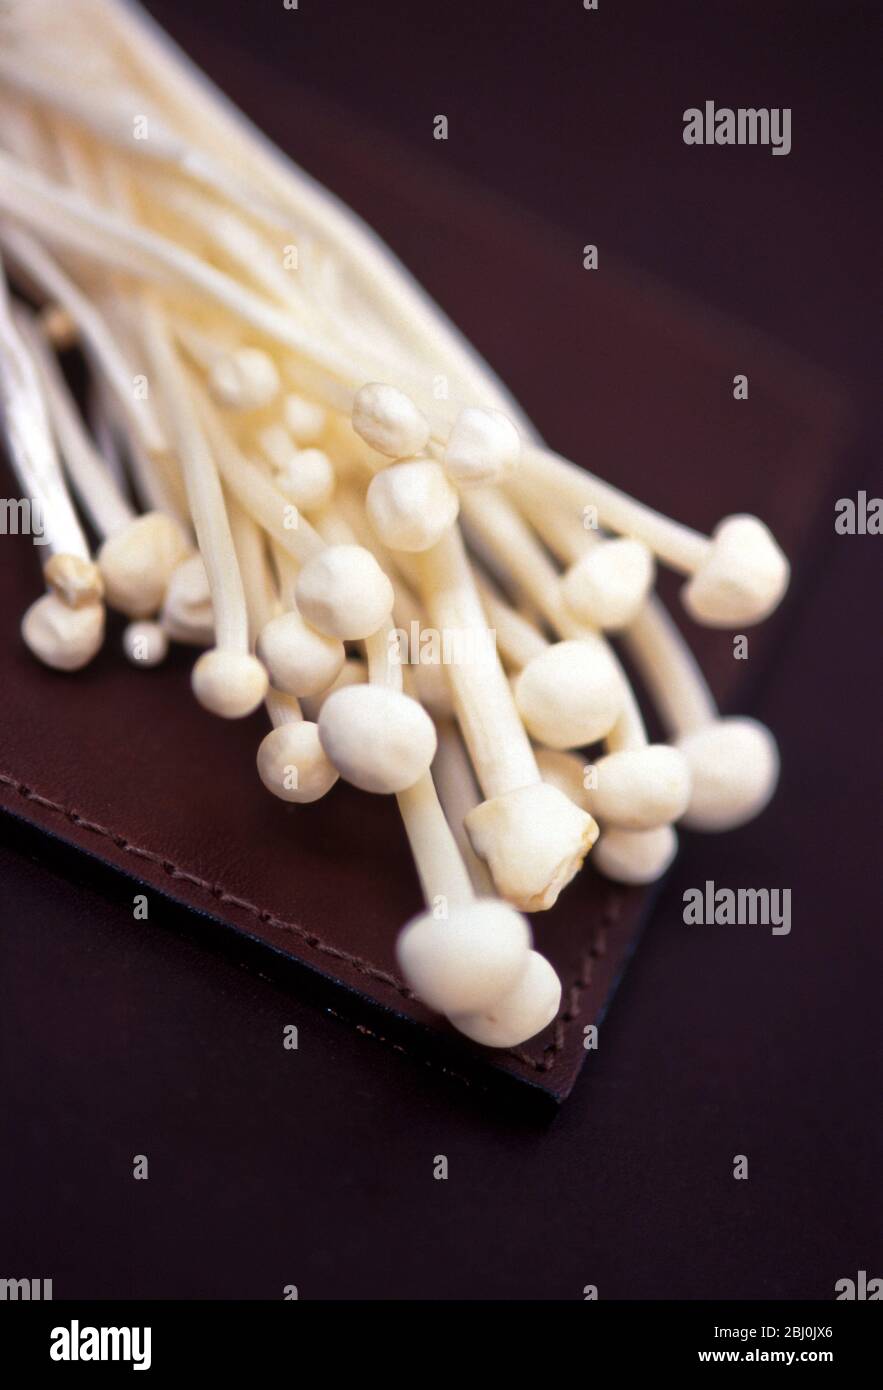 Detail of enoki mushrooms against brown background. Enotiake are long, thin white mushrooms used in Asian cuisines, particularly those of Japan, Korea Stock Photo